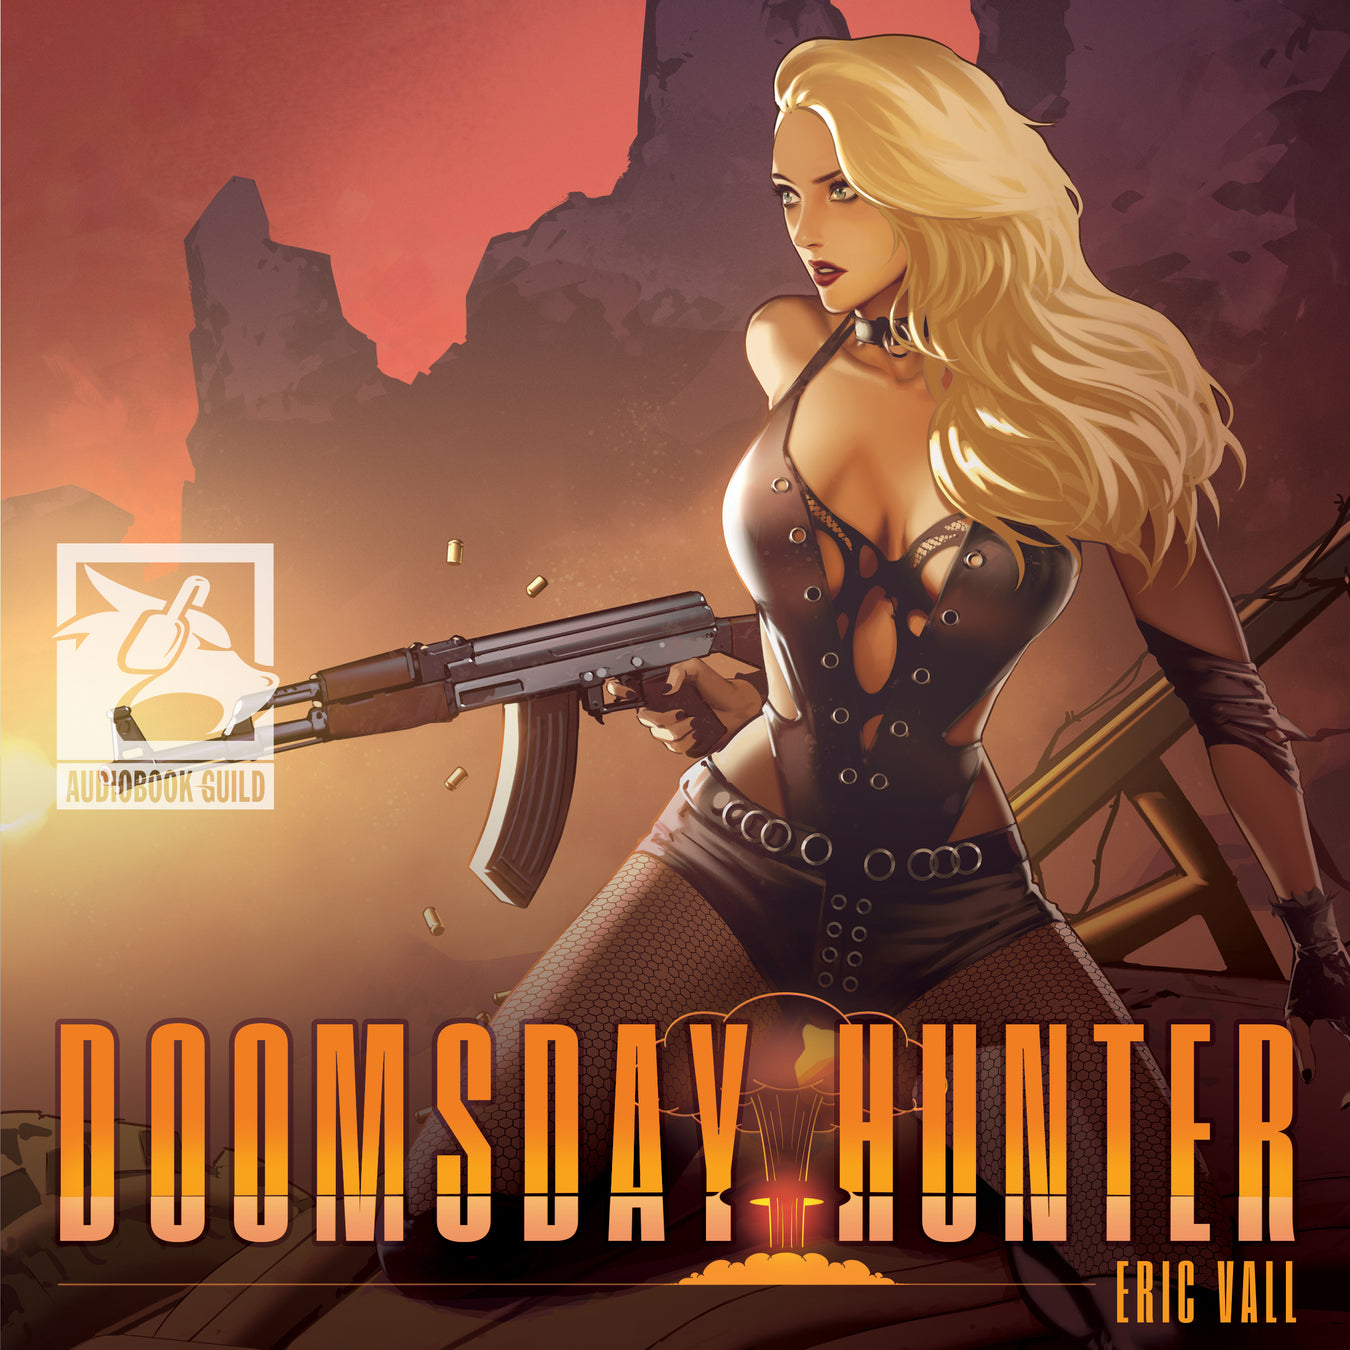 Doomsday Hunter by Eric Vall